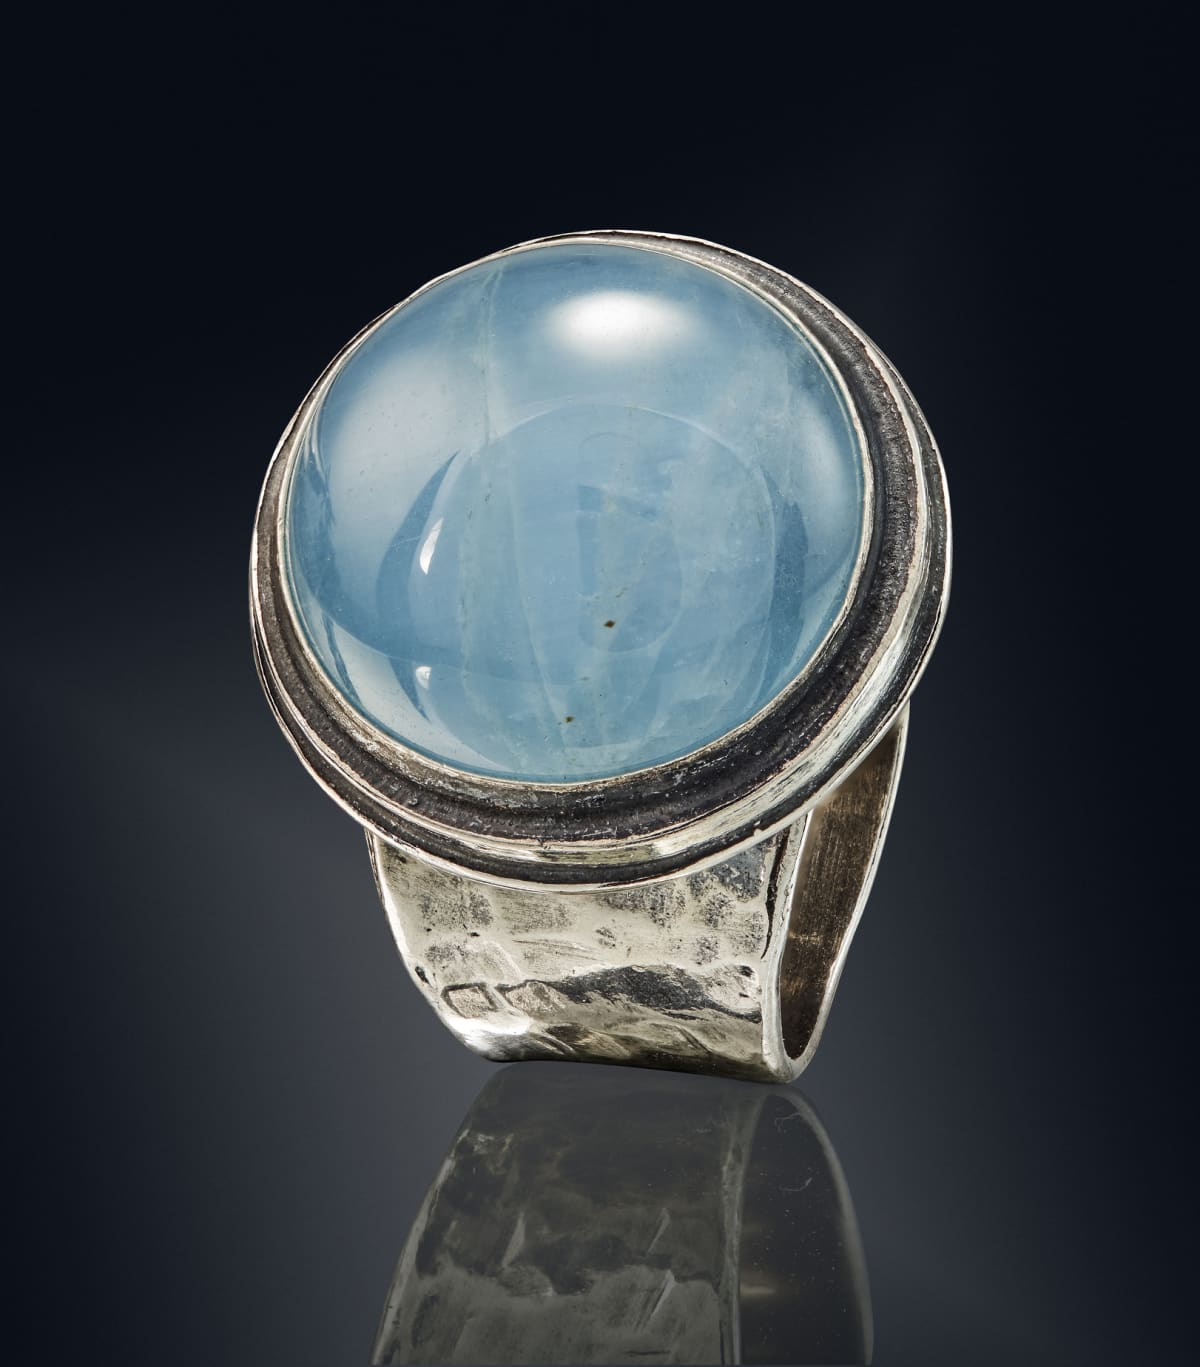 Mood ring with a blue stone on a dark background